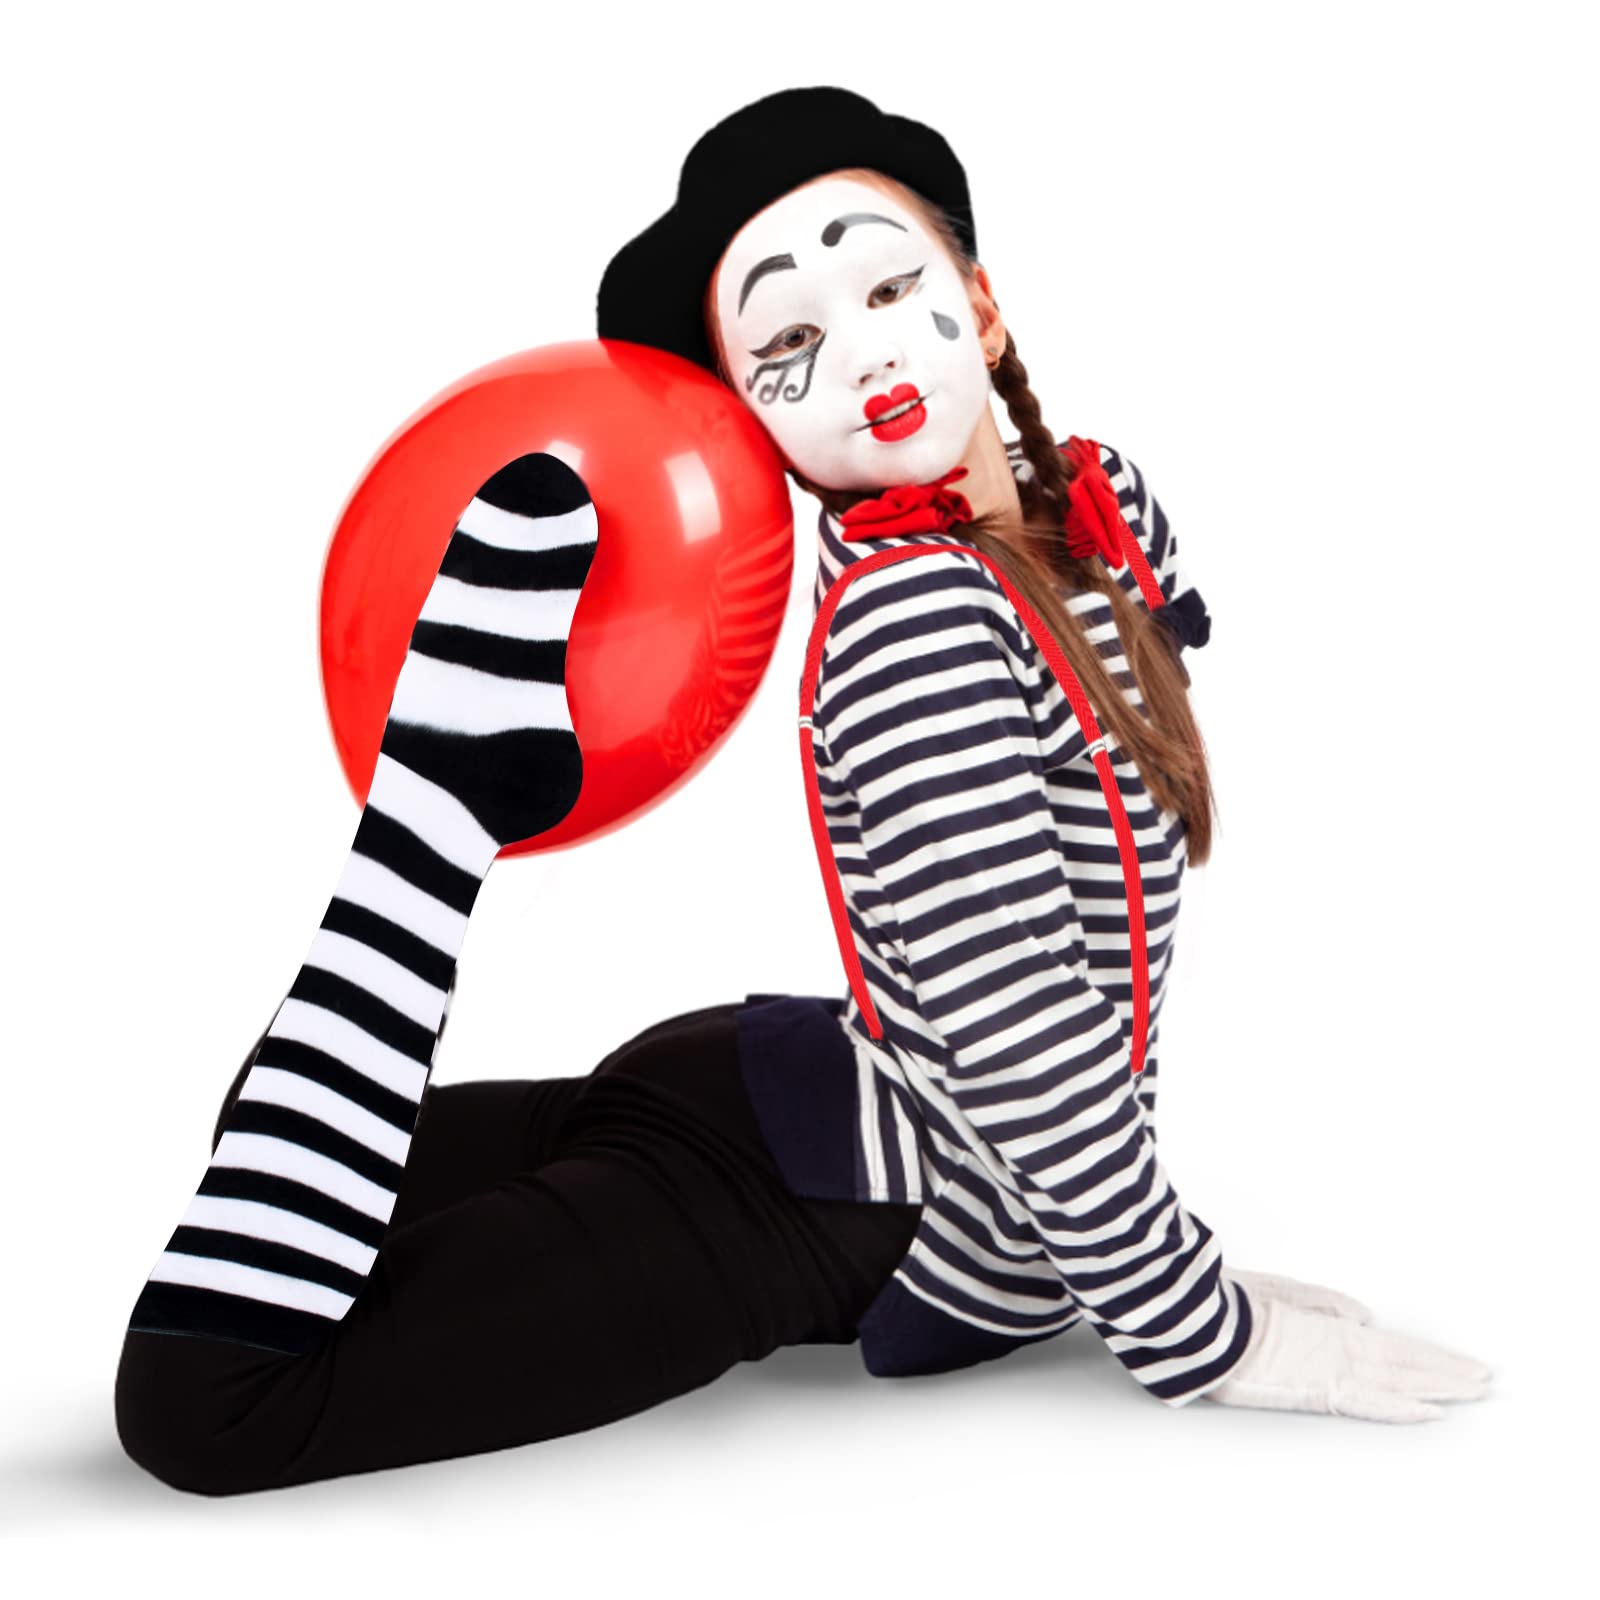 Keymall Kids Mime Artist Accessories 6Pcs with Beret Hat Suspender Scarf Gloves Face Paint Socks for Halloween Mime Costume